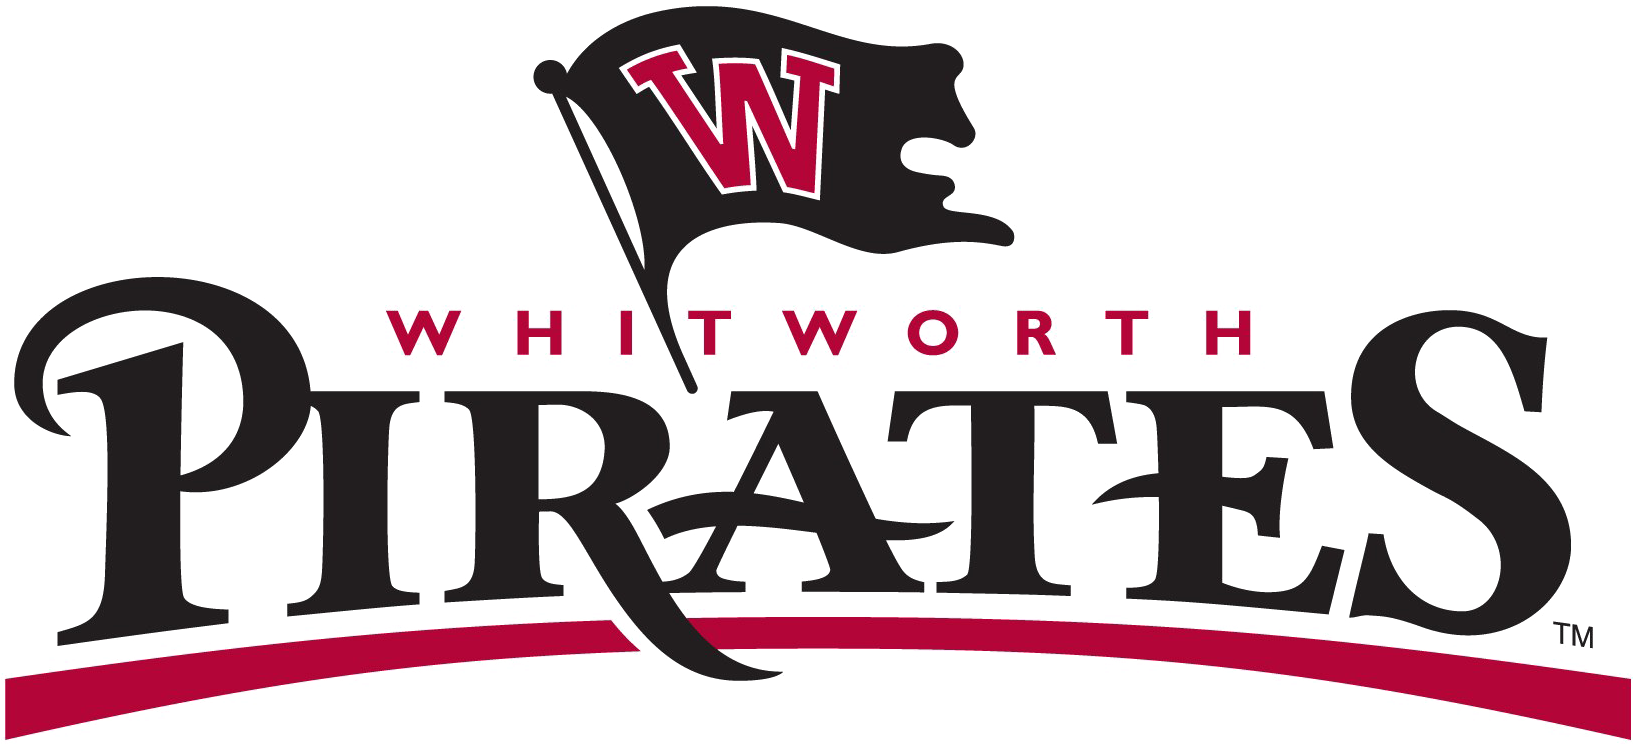 Pirate Logo Png Image With Transparent Background - Whitworth University Mascot (1640x743), Png Download